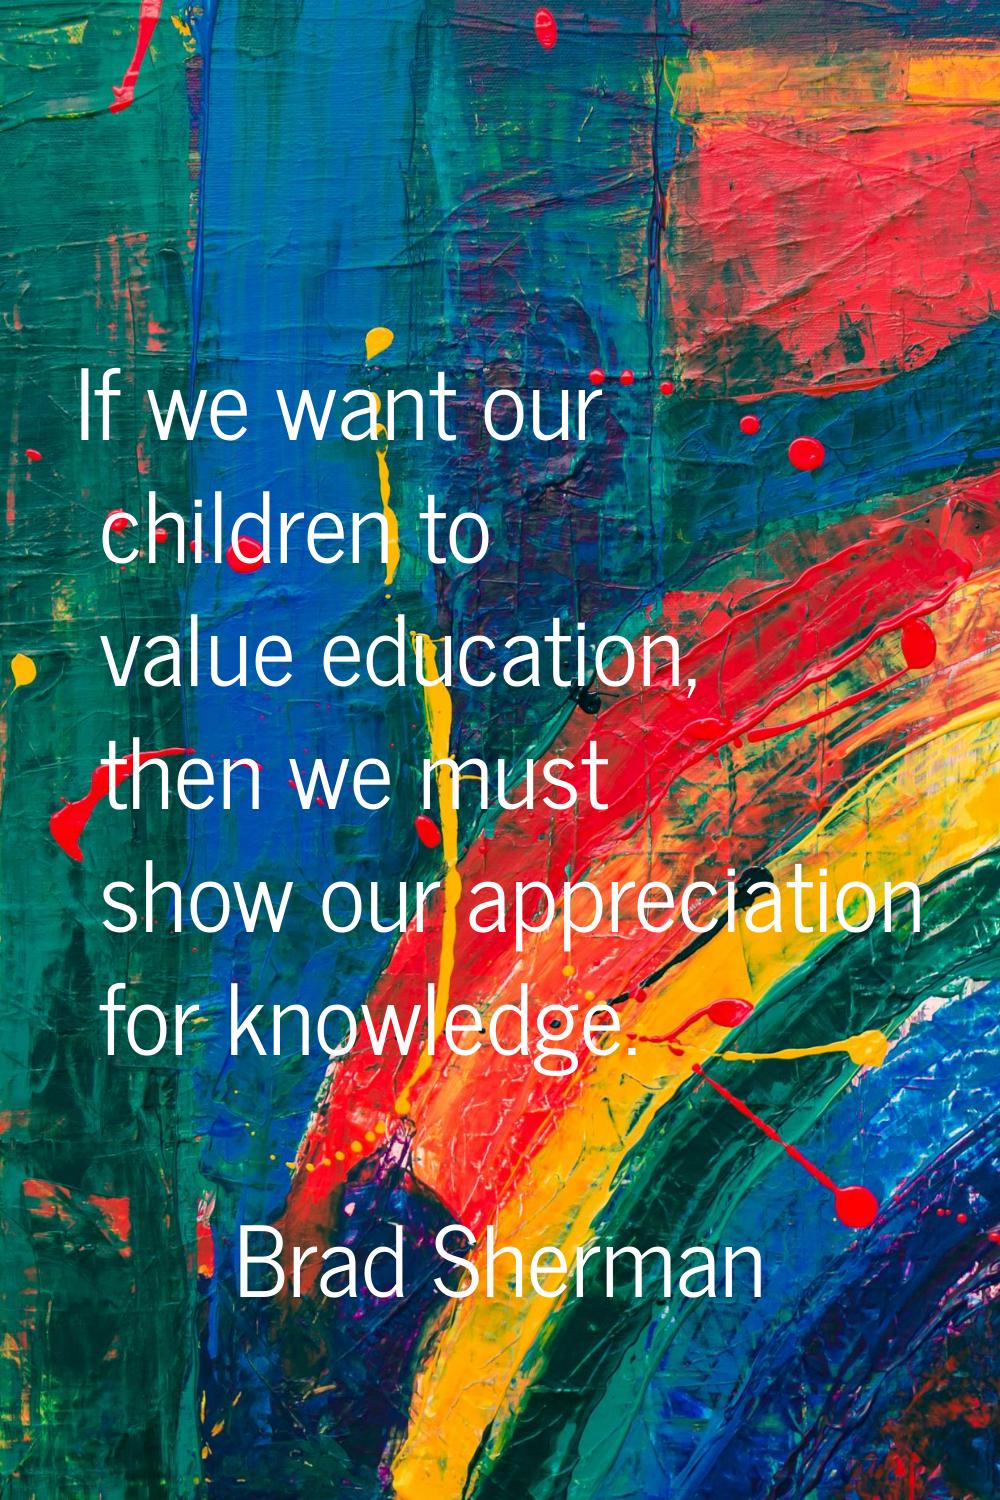 If we want our children to value education, then we must show our appreciation for knowledge.